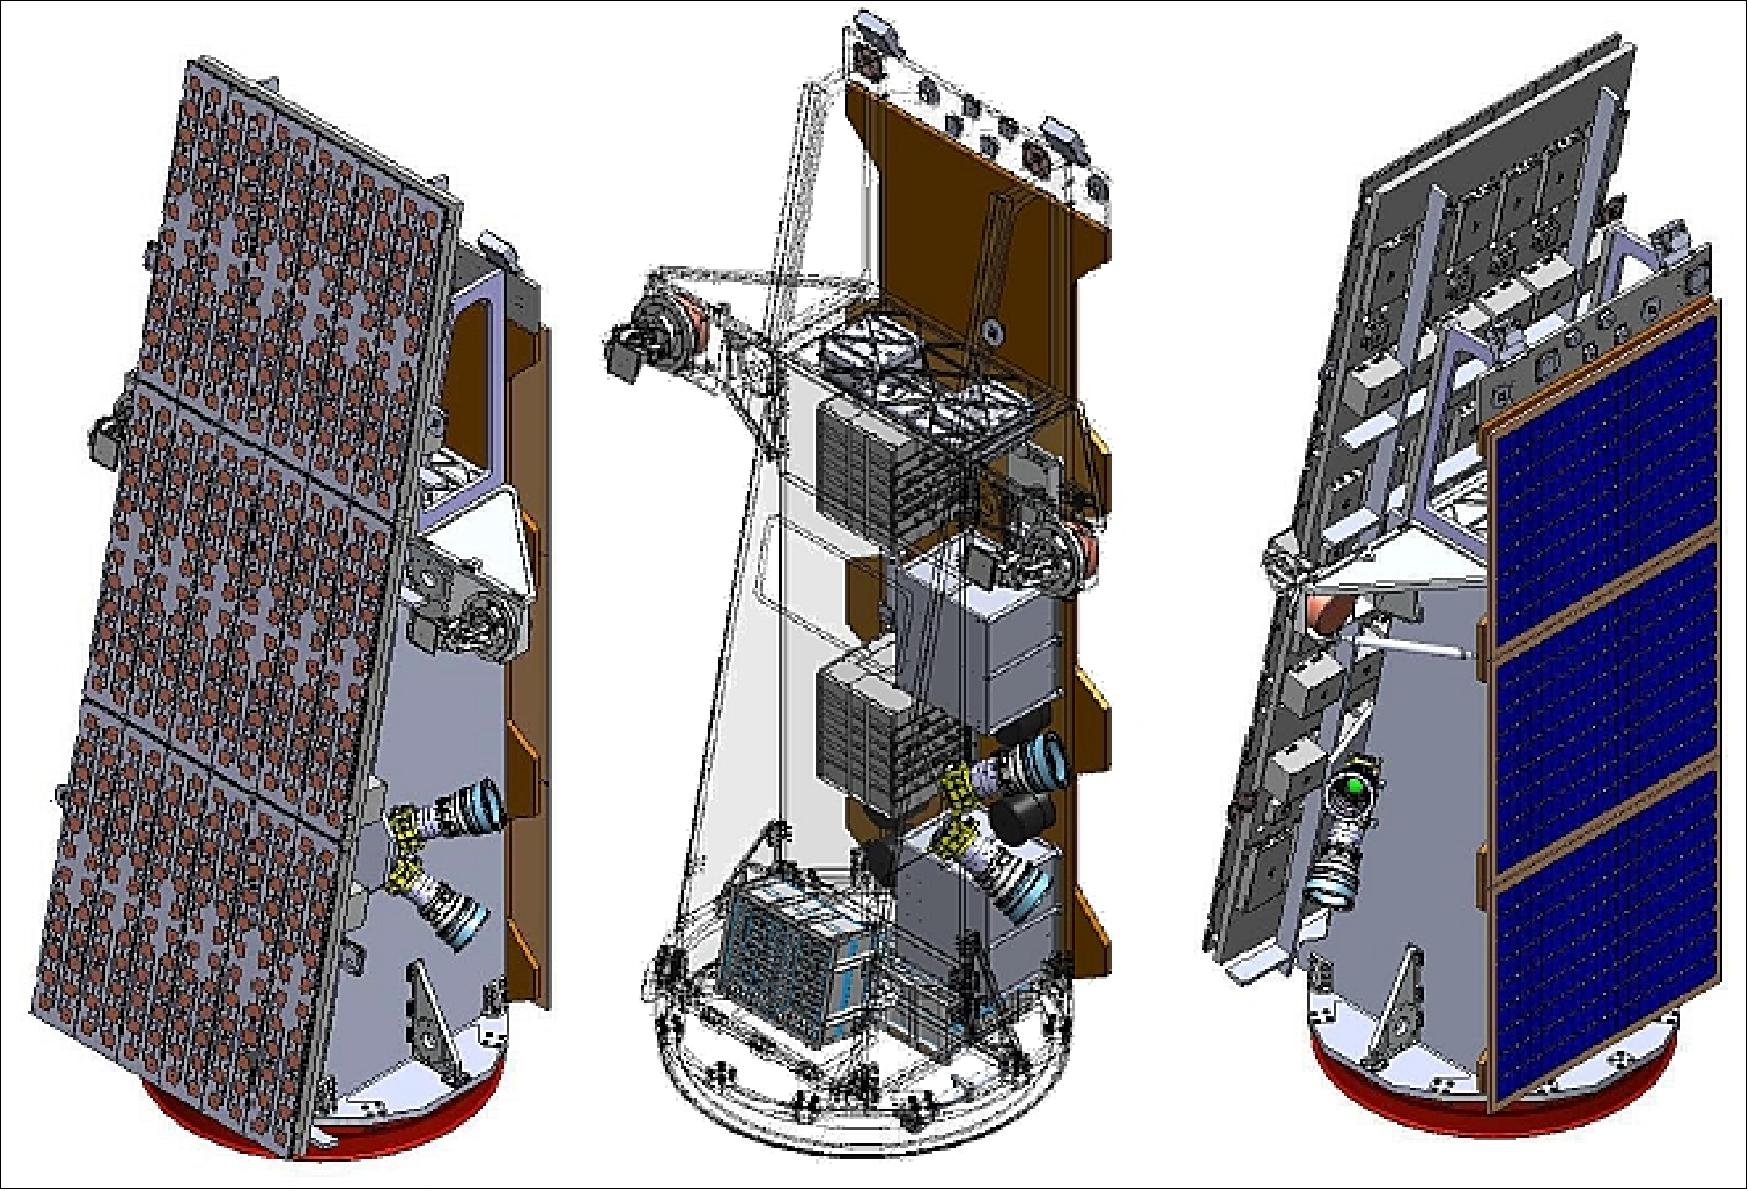 Figure 1: NovaSAR-1 spacecraft with payload antenna (left), component accommodation (center), and solar panel (right), image credit: SSTL, Airbus DS